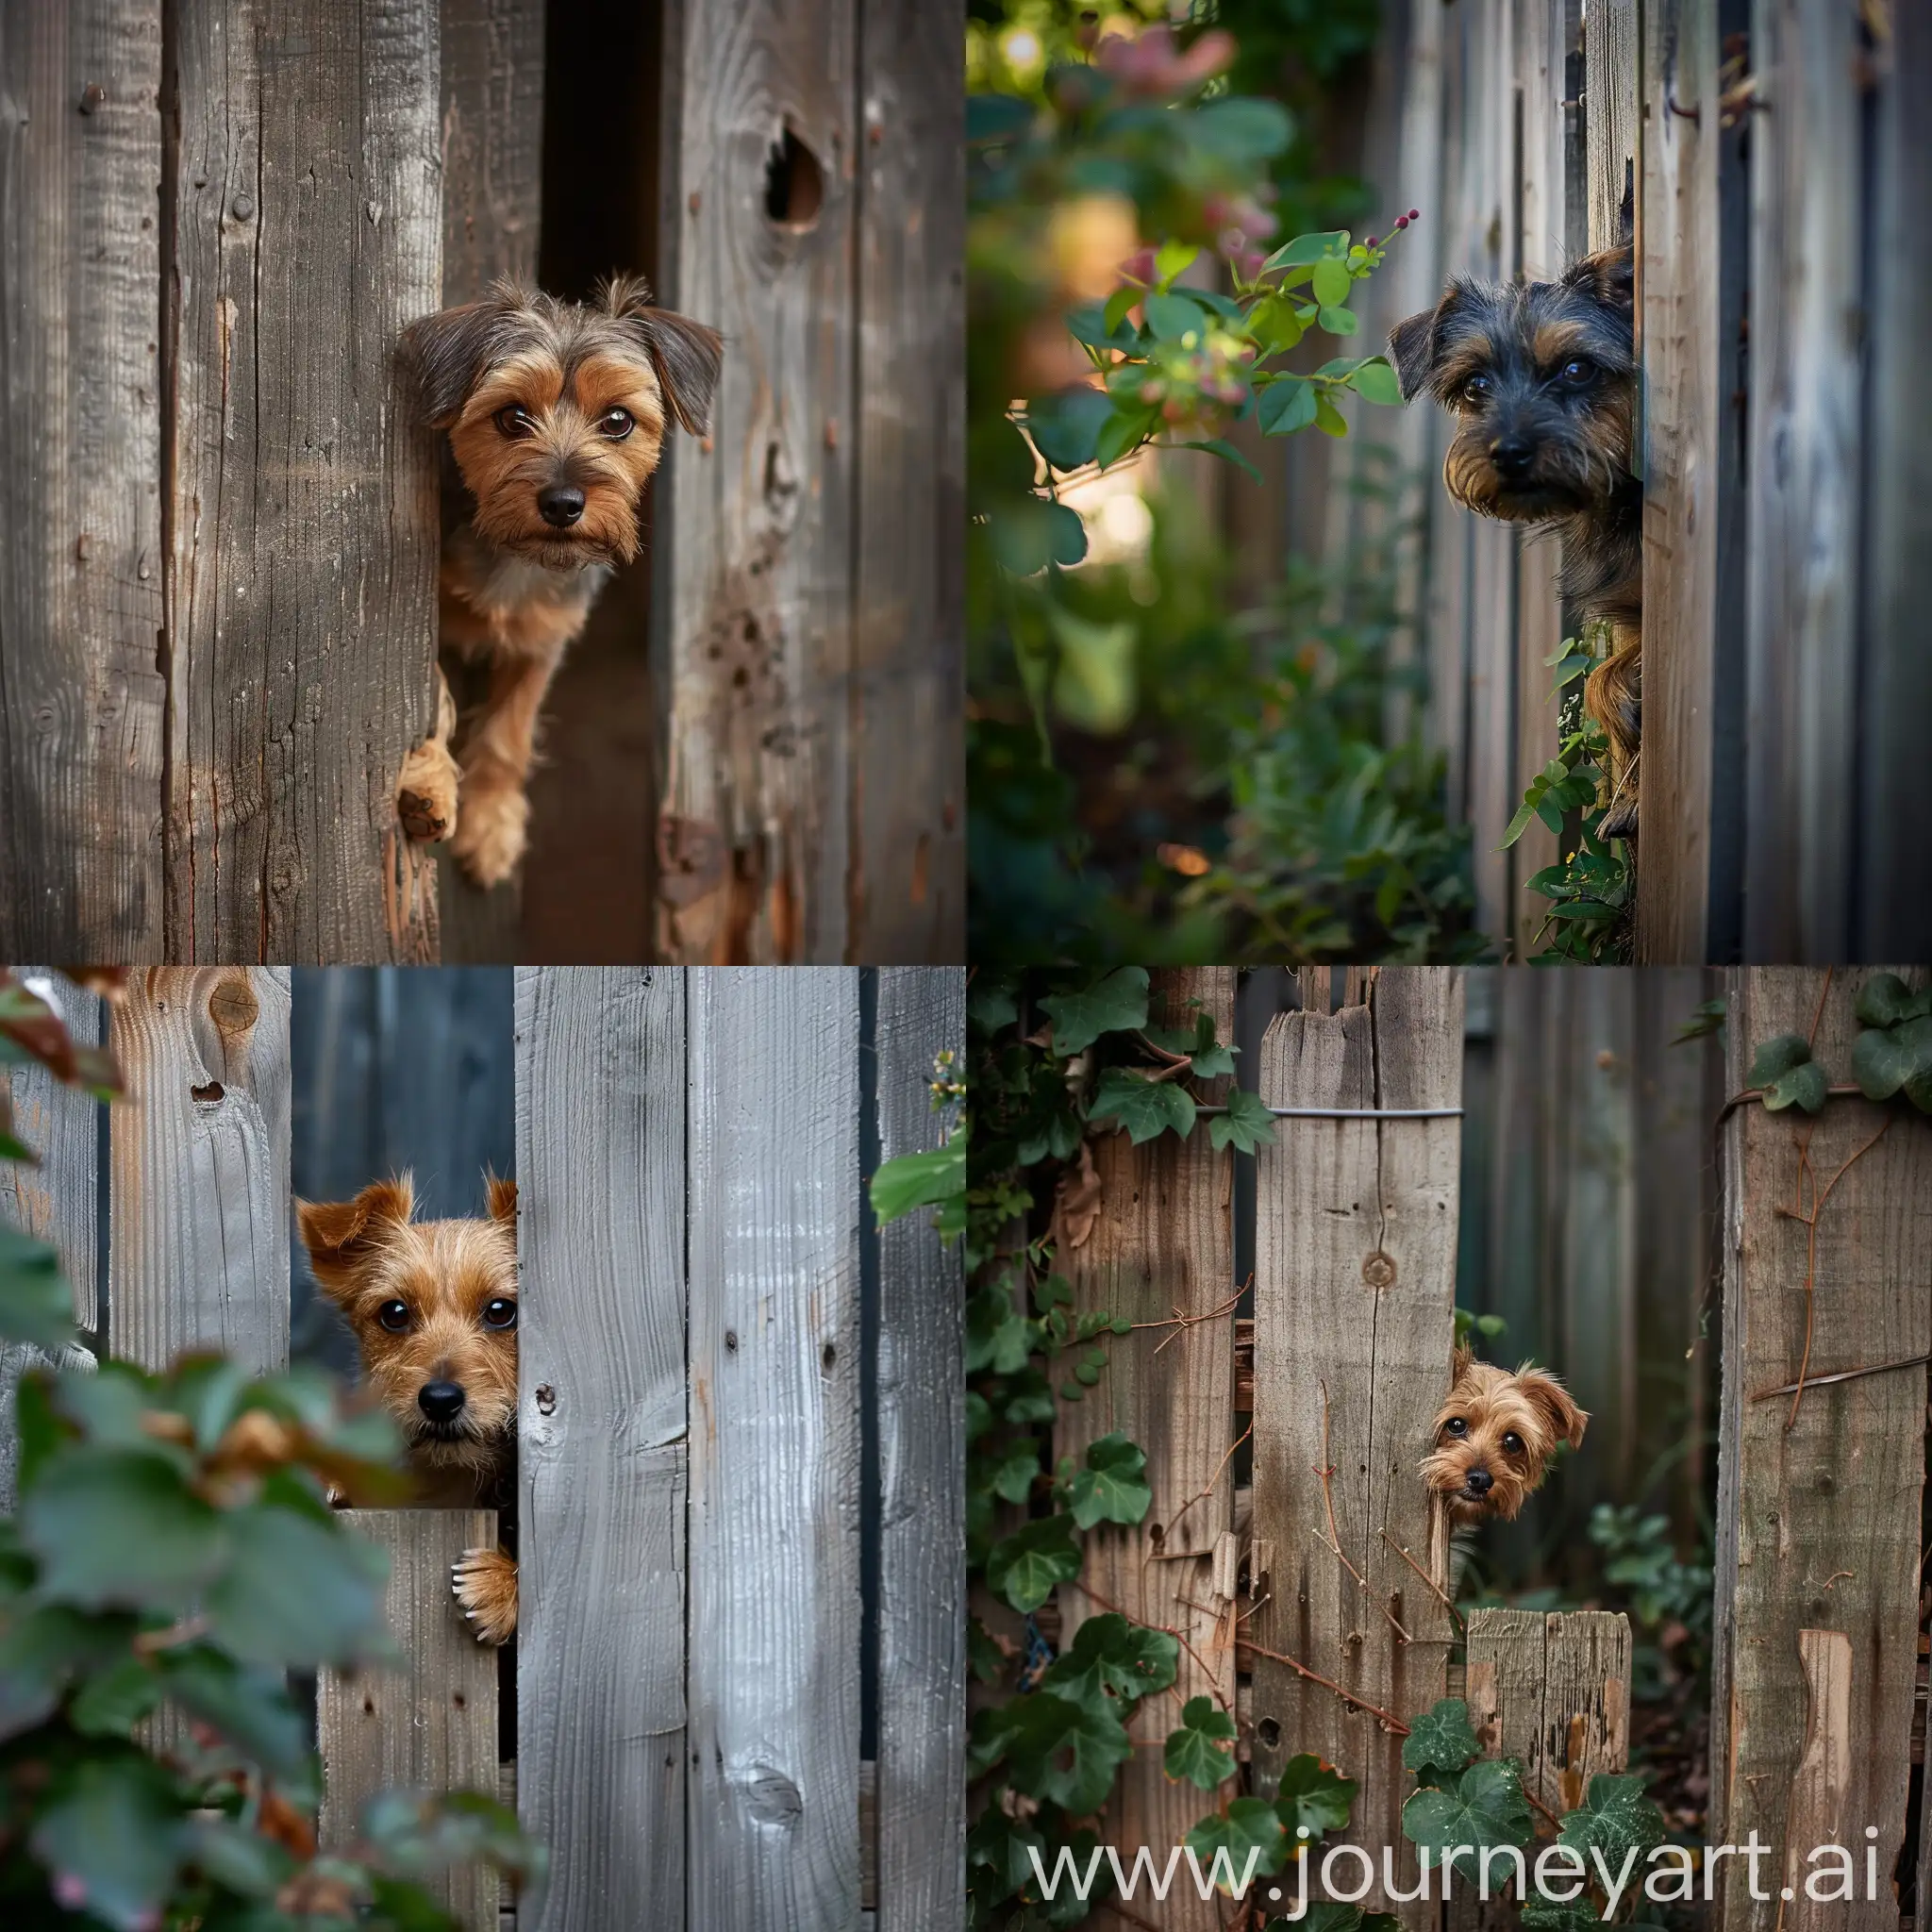 A small dog climbs out through a gap in the fence.
